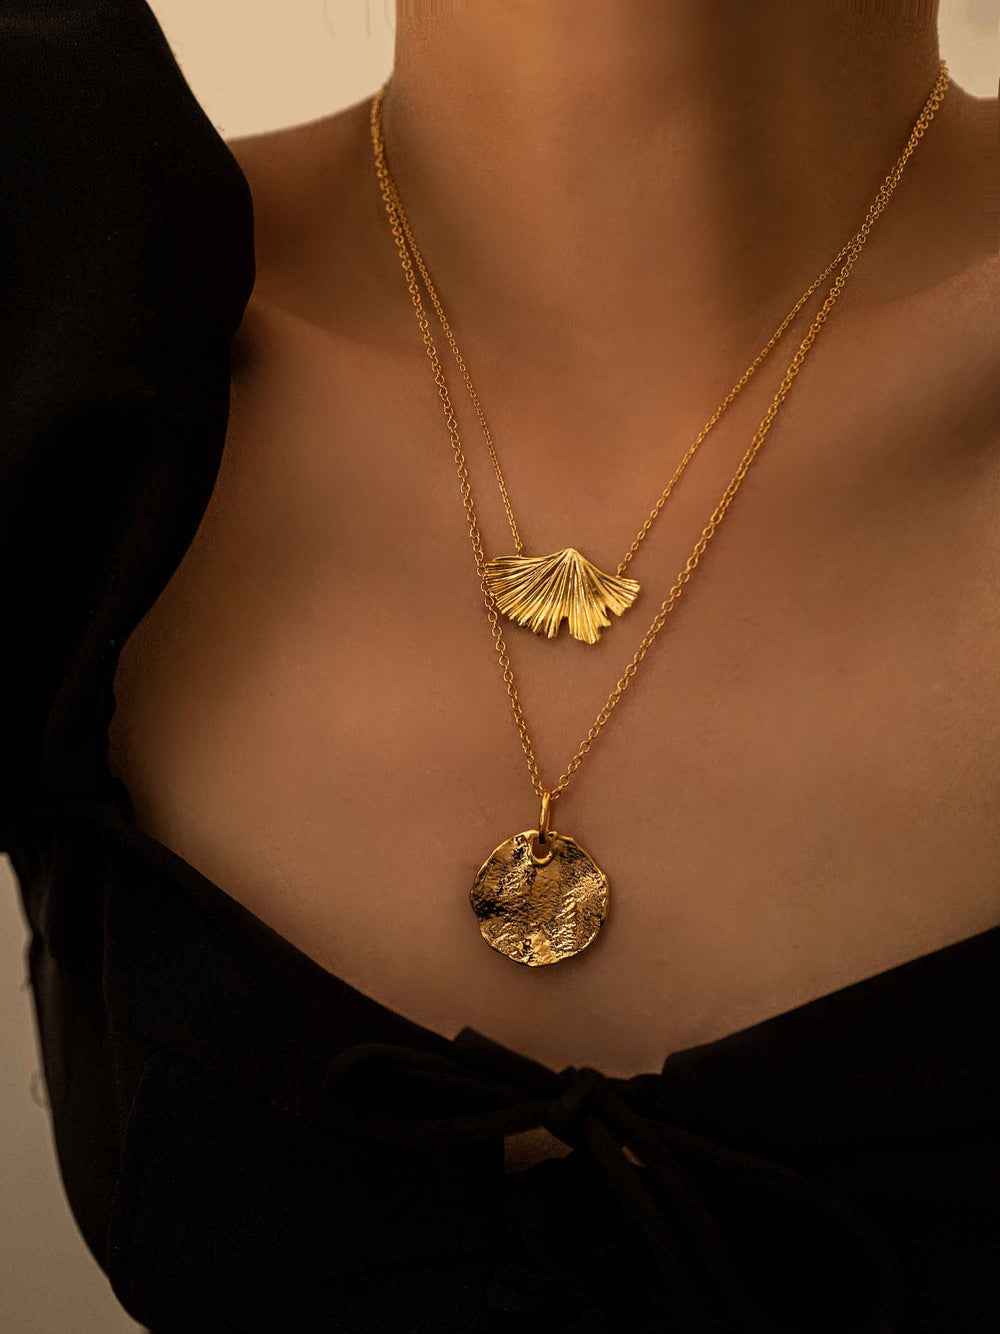 a model wear A gold necklace with a round pendant